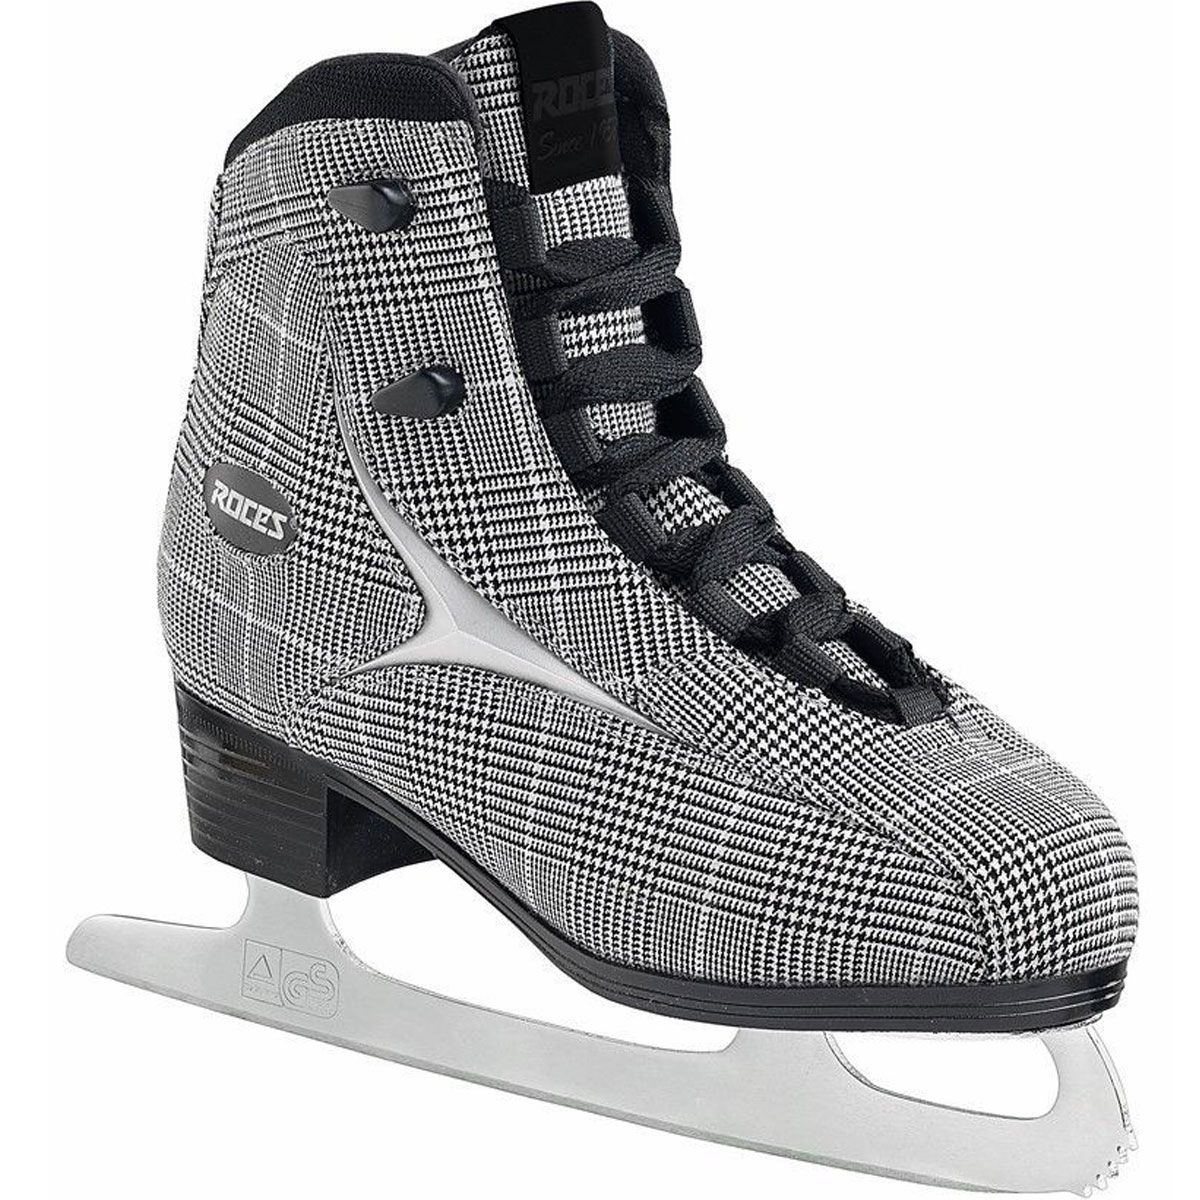 Roces Women's Brits Ice Skate Superior Italian Style 450557 00003 - image 1 of 2